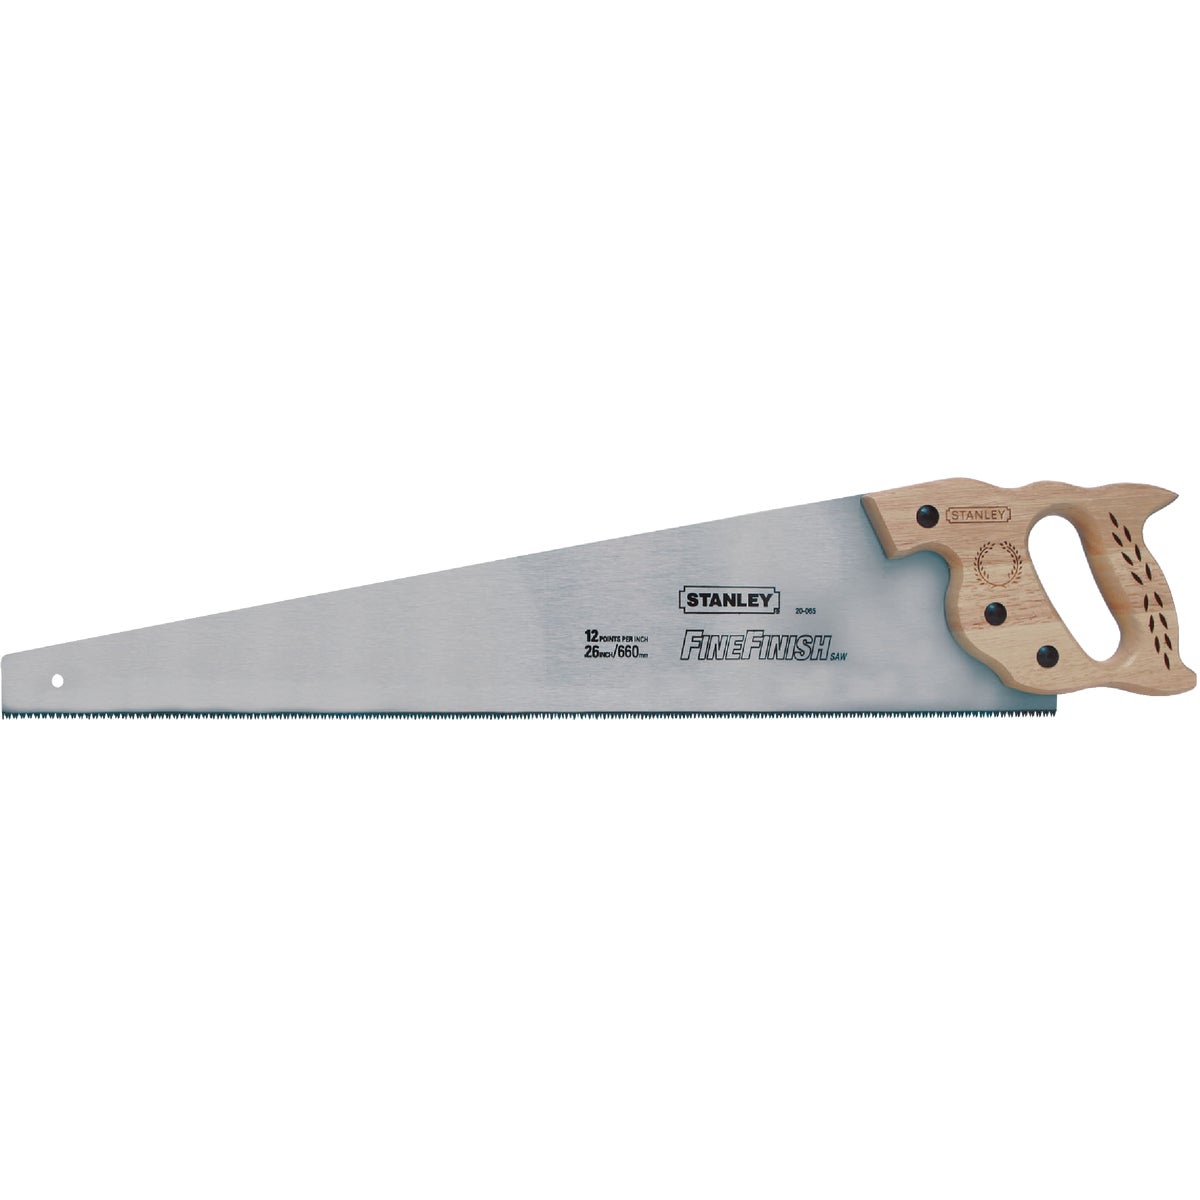 Item 318953, Multi-purpose saw for a high-quality finish.